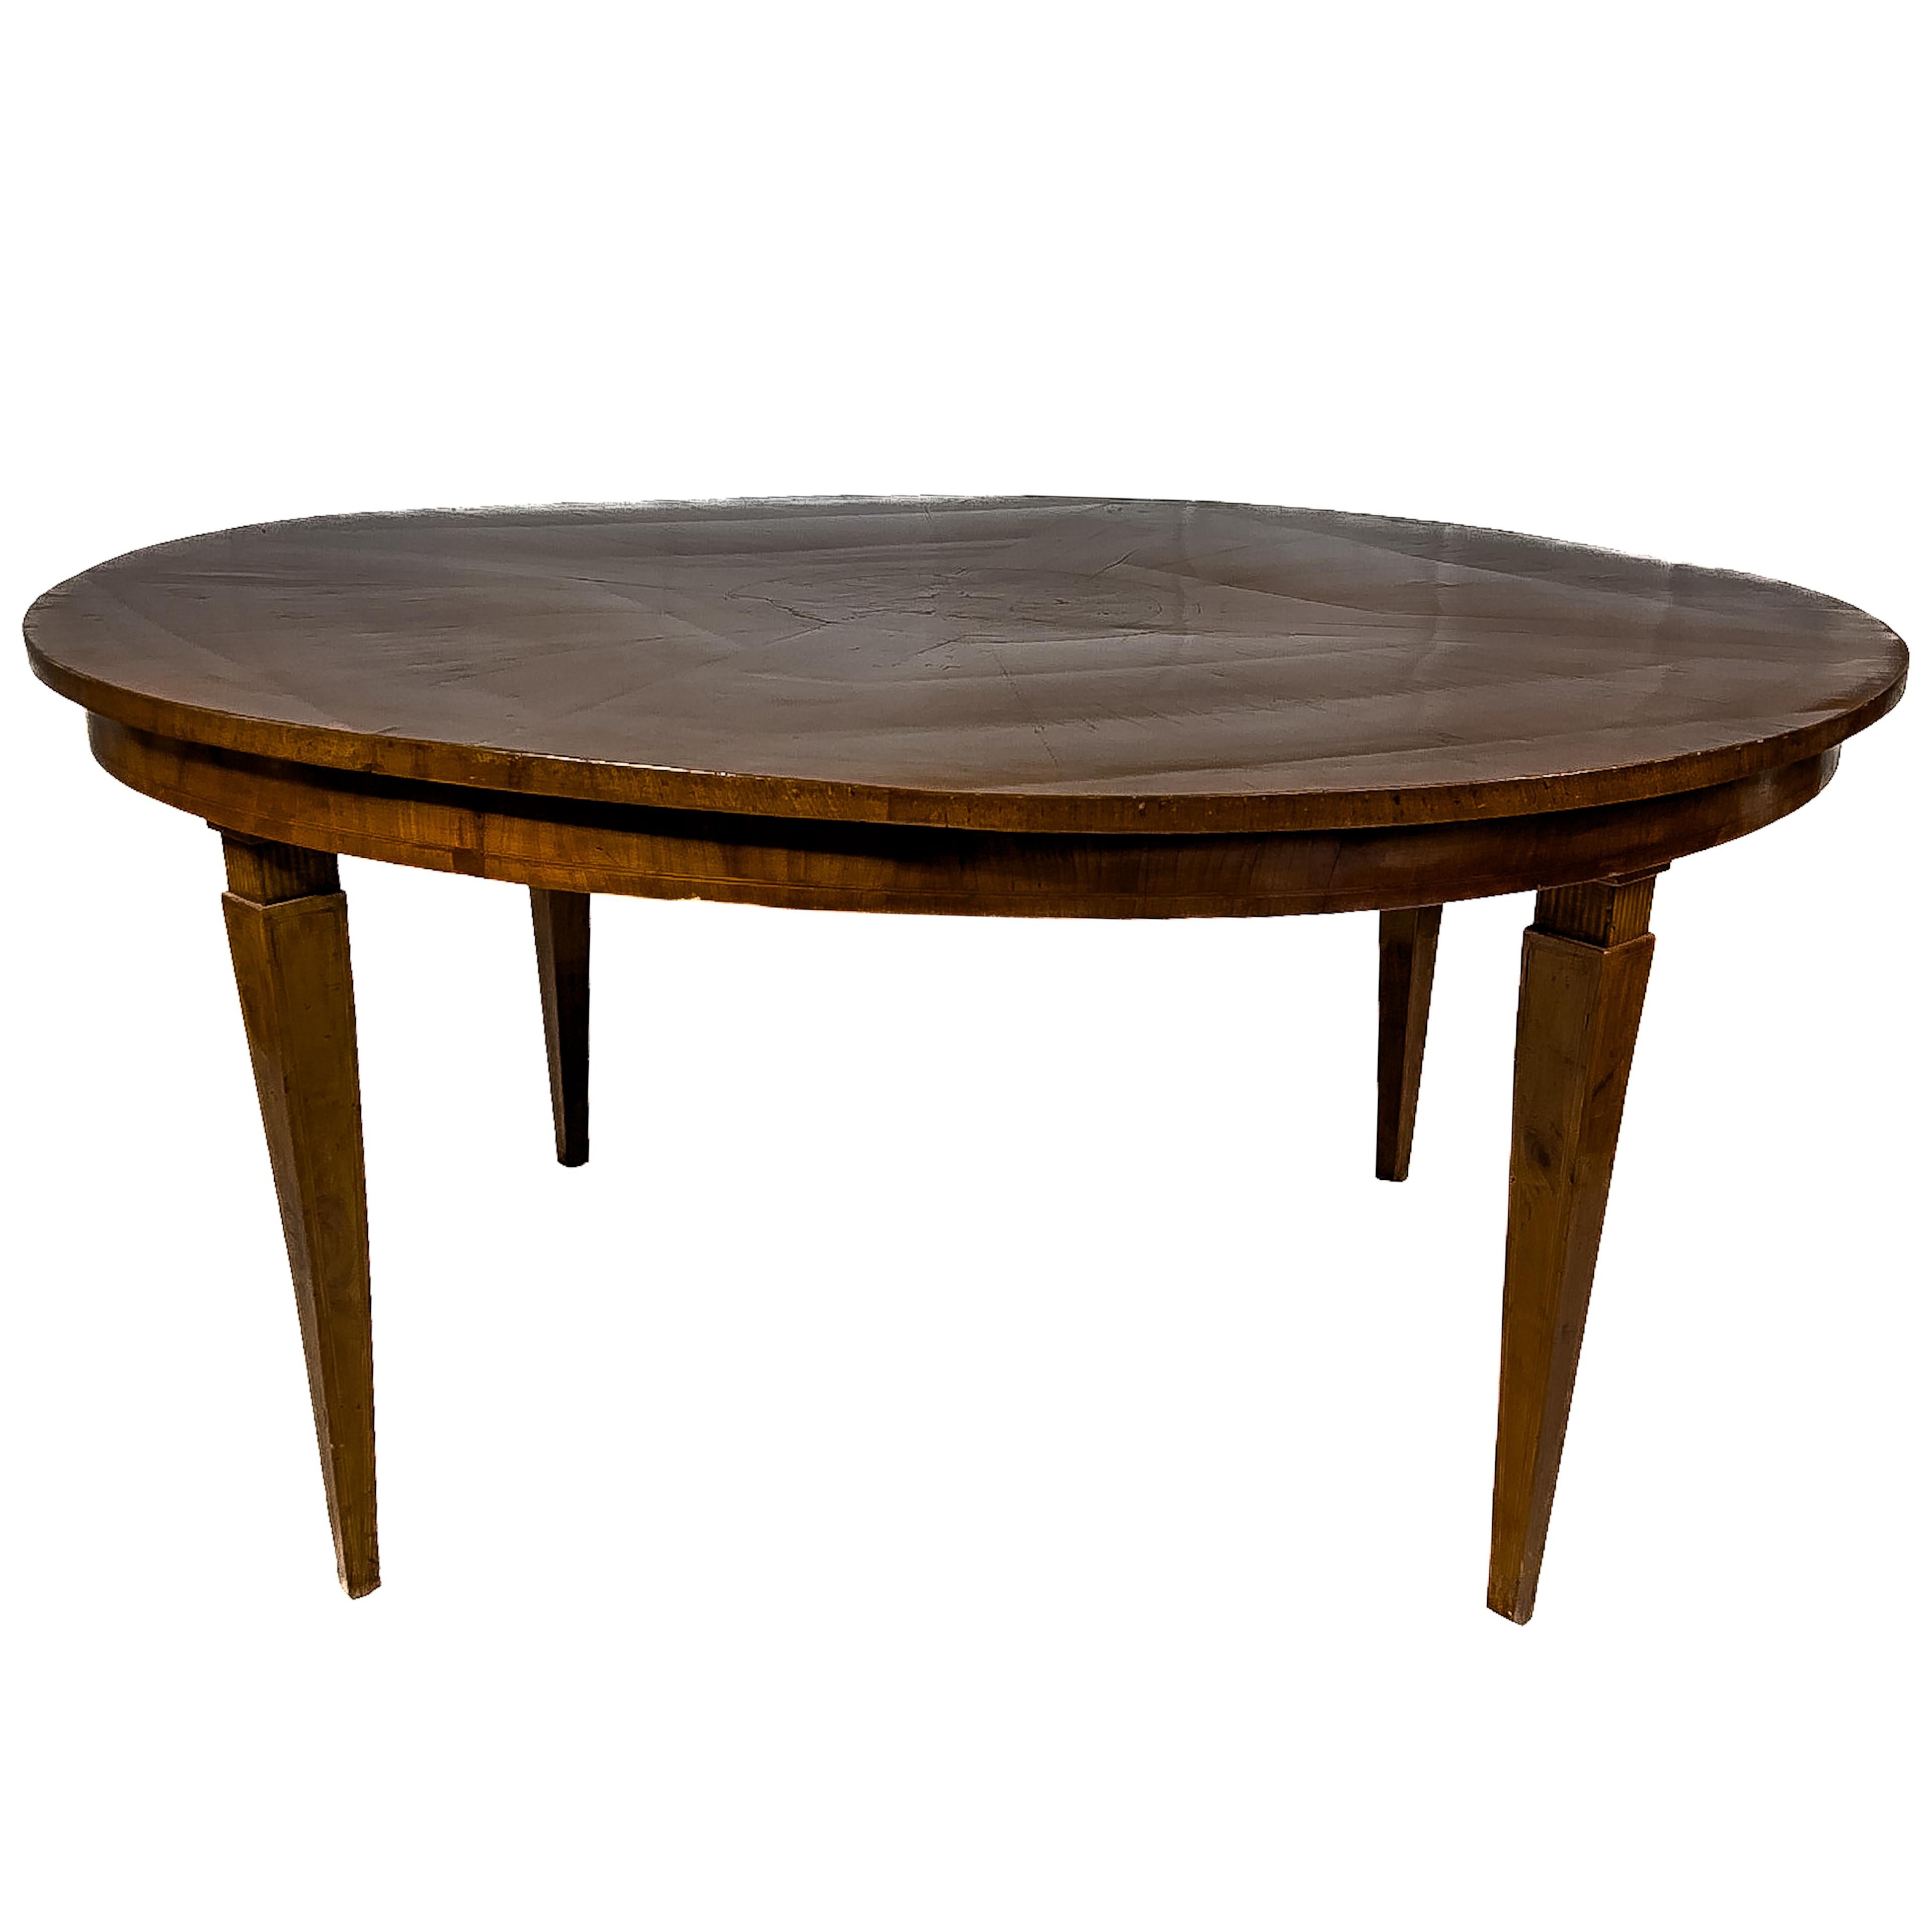 19th Century 19th C. Italian Neoclassical Dining Table For Sale